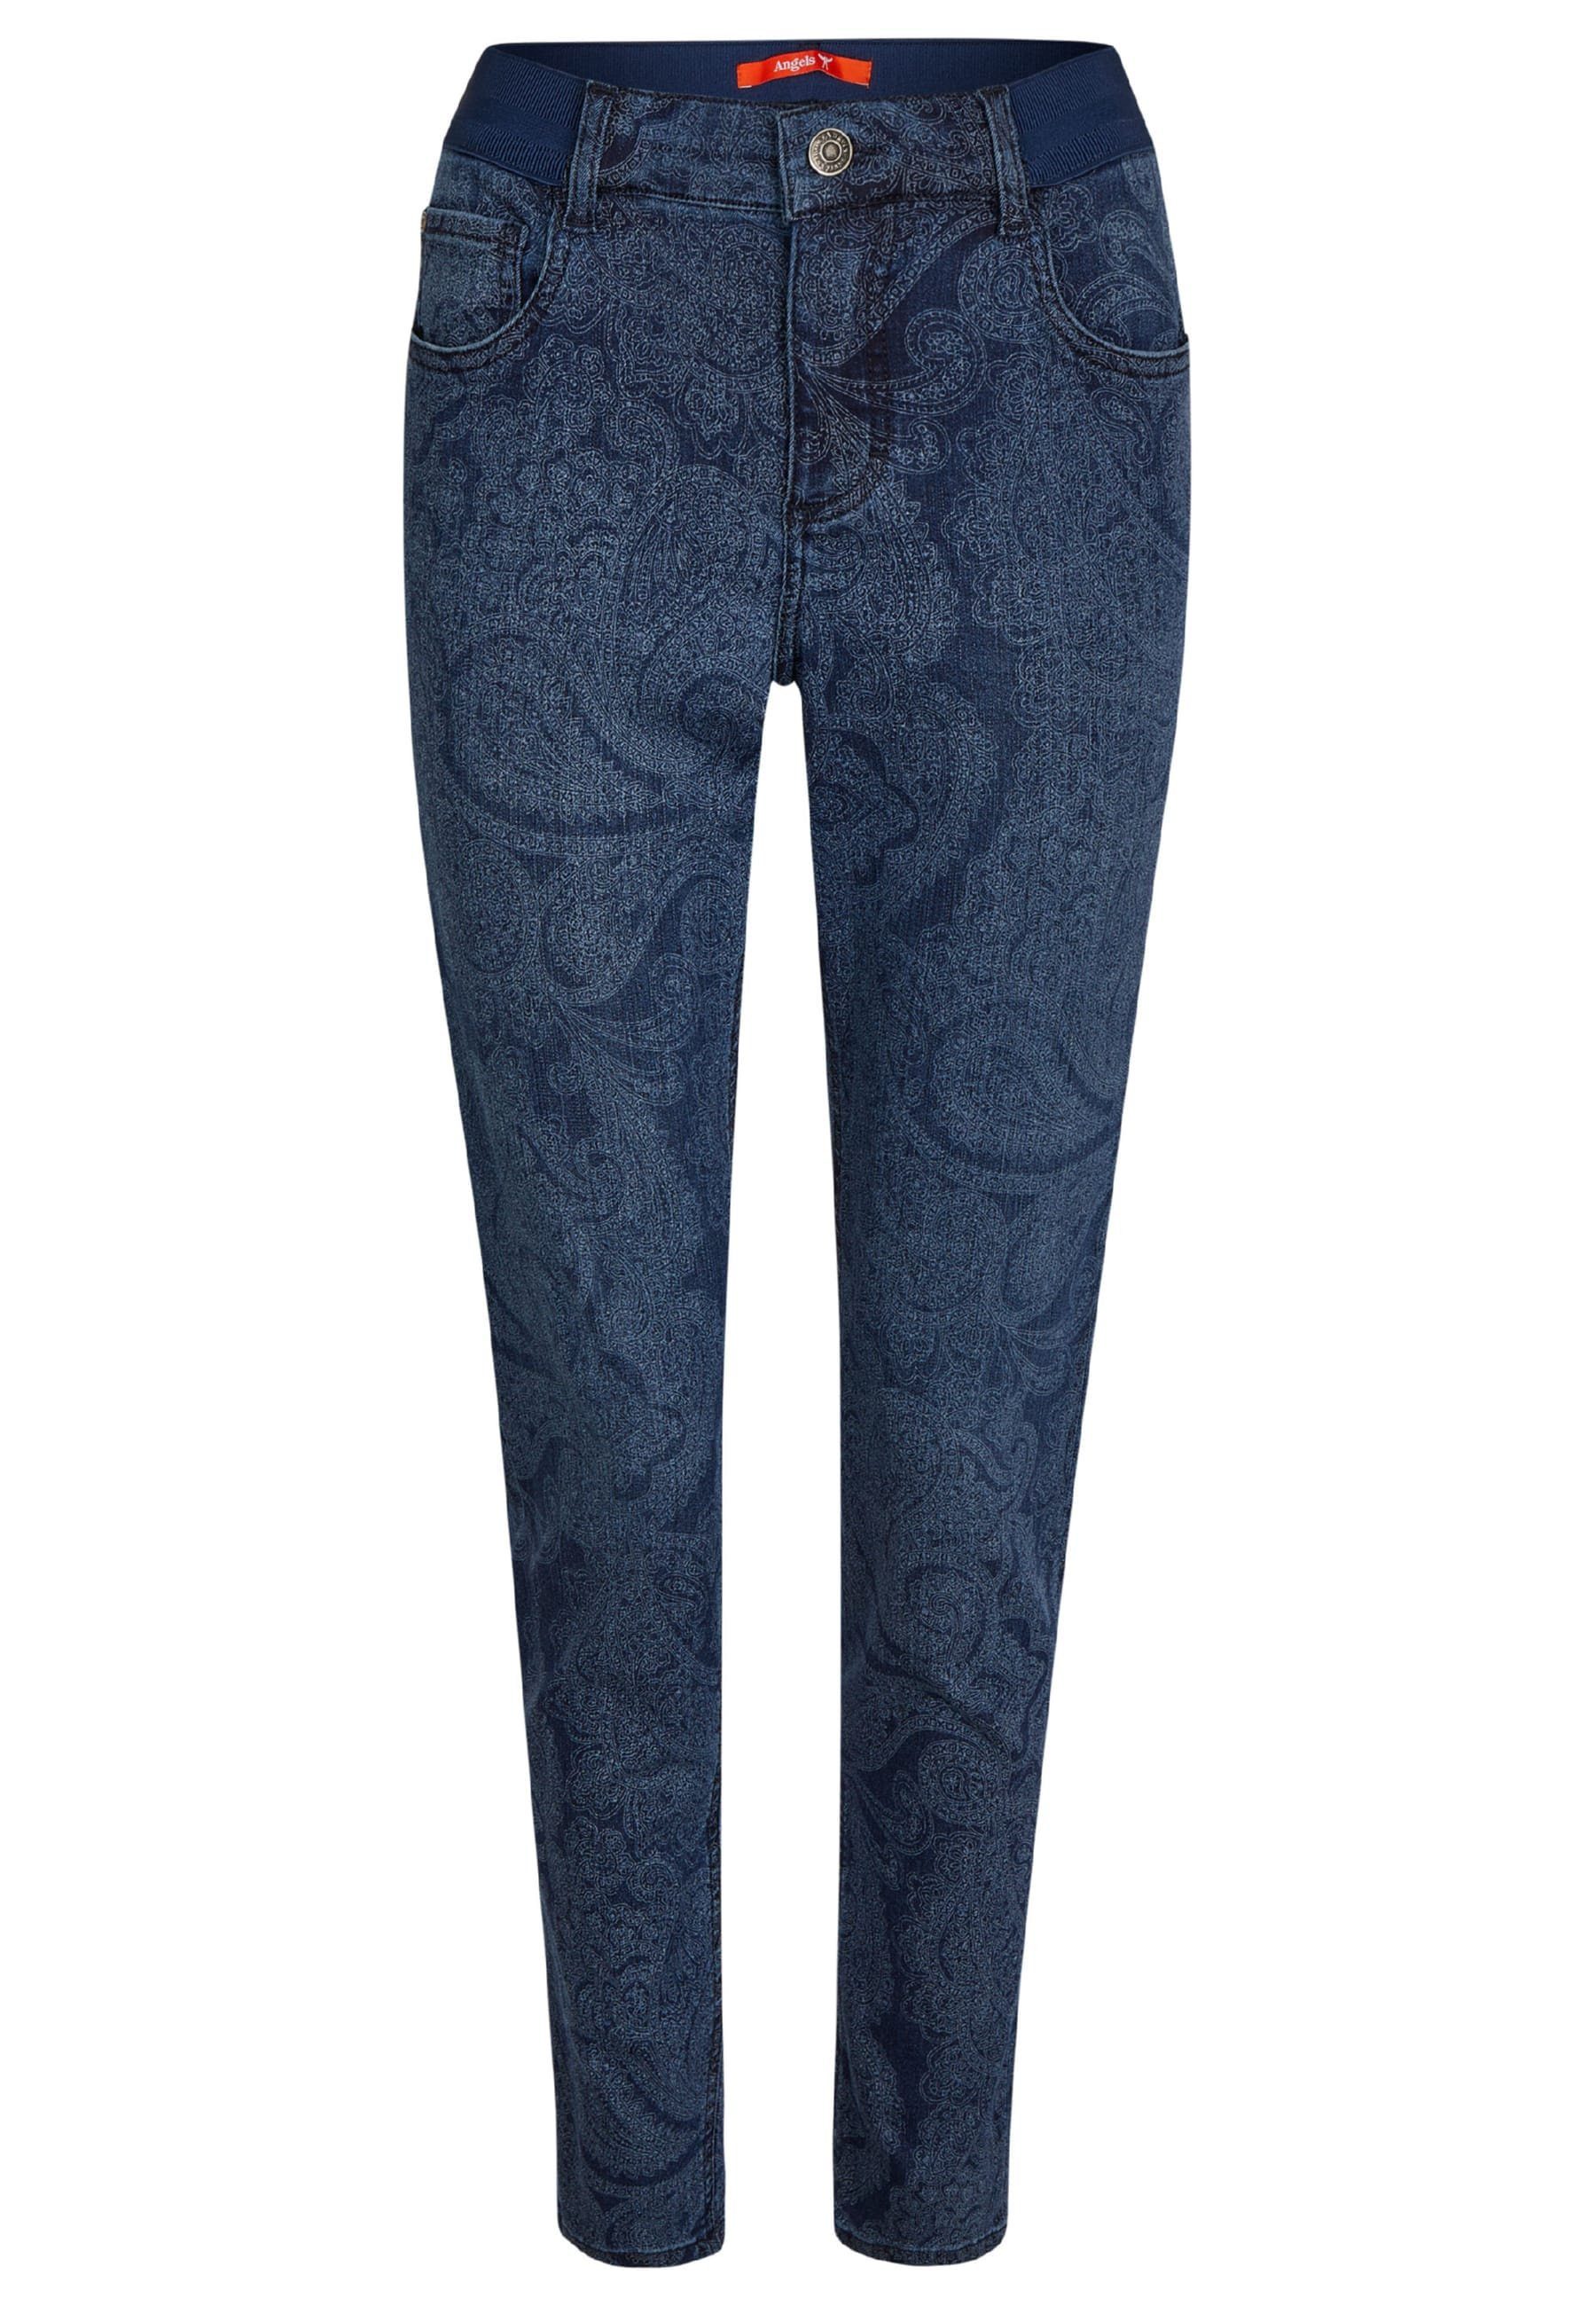 Jeans mit Paisley-Muster Size ANGELS blue mit Slim-fit-Jeans Label-Applikationen One